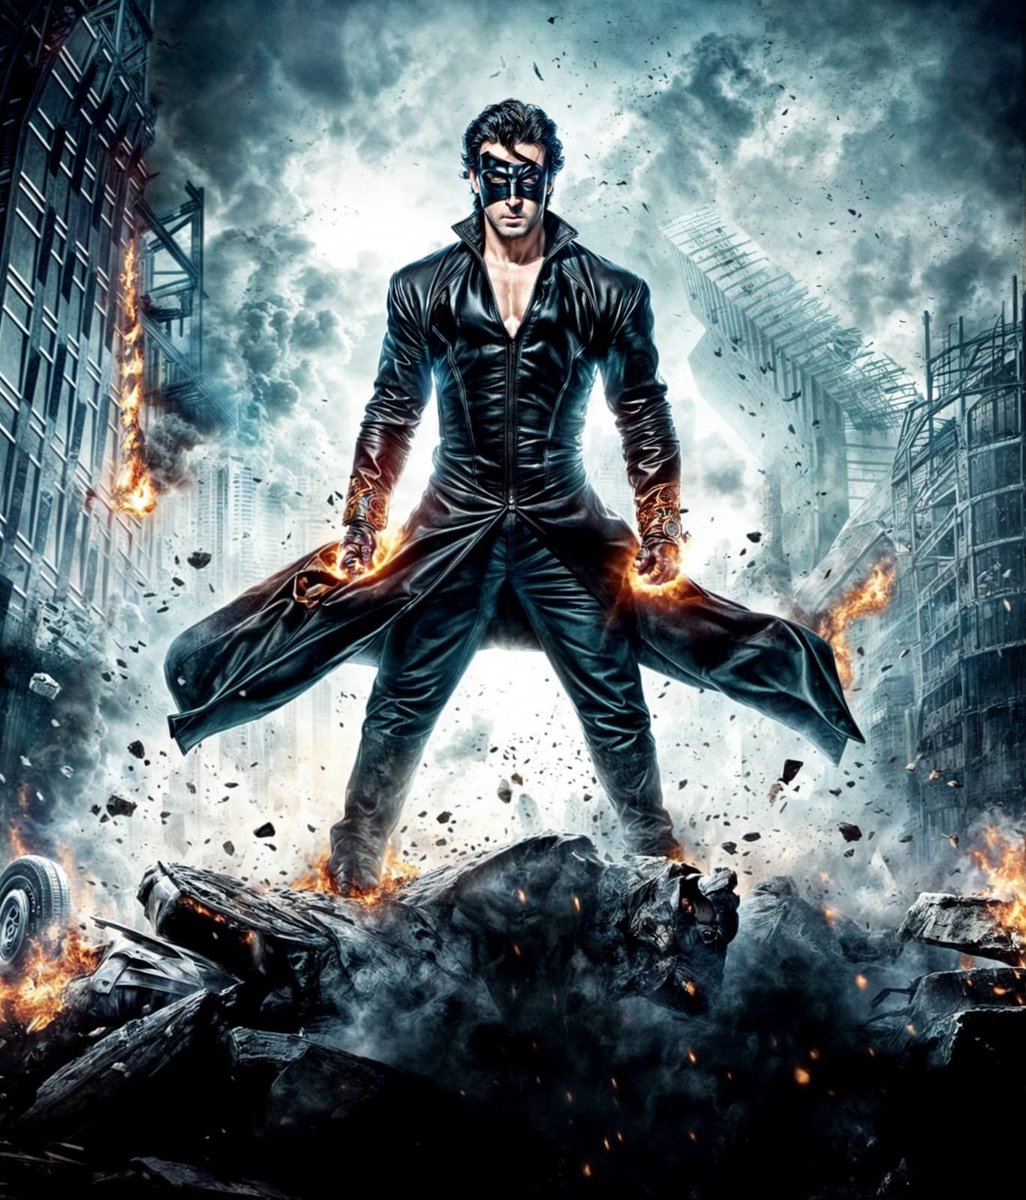 #SiddharthAnand's association with #HrithikRoshan's #Krrish4 through #Marflix promises to elevate the beloved franchise to new heights! 💥 After their stellar performances in #BangBang, #WAR, and #Fighter, fans can expect nothing short of magic! ✨